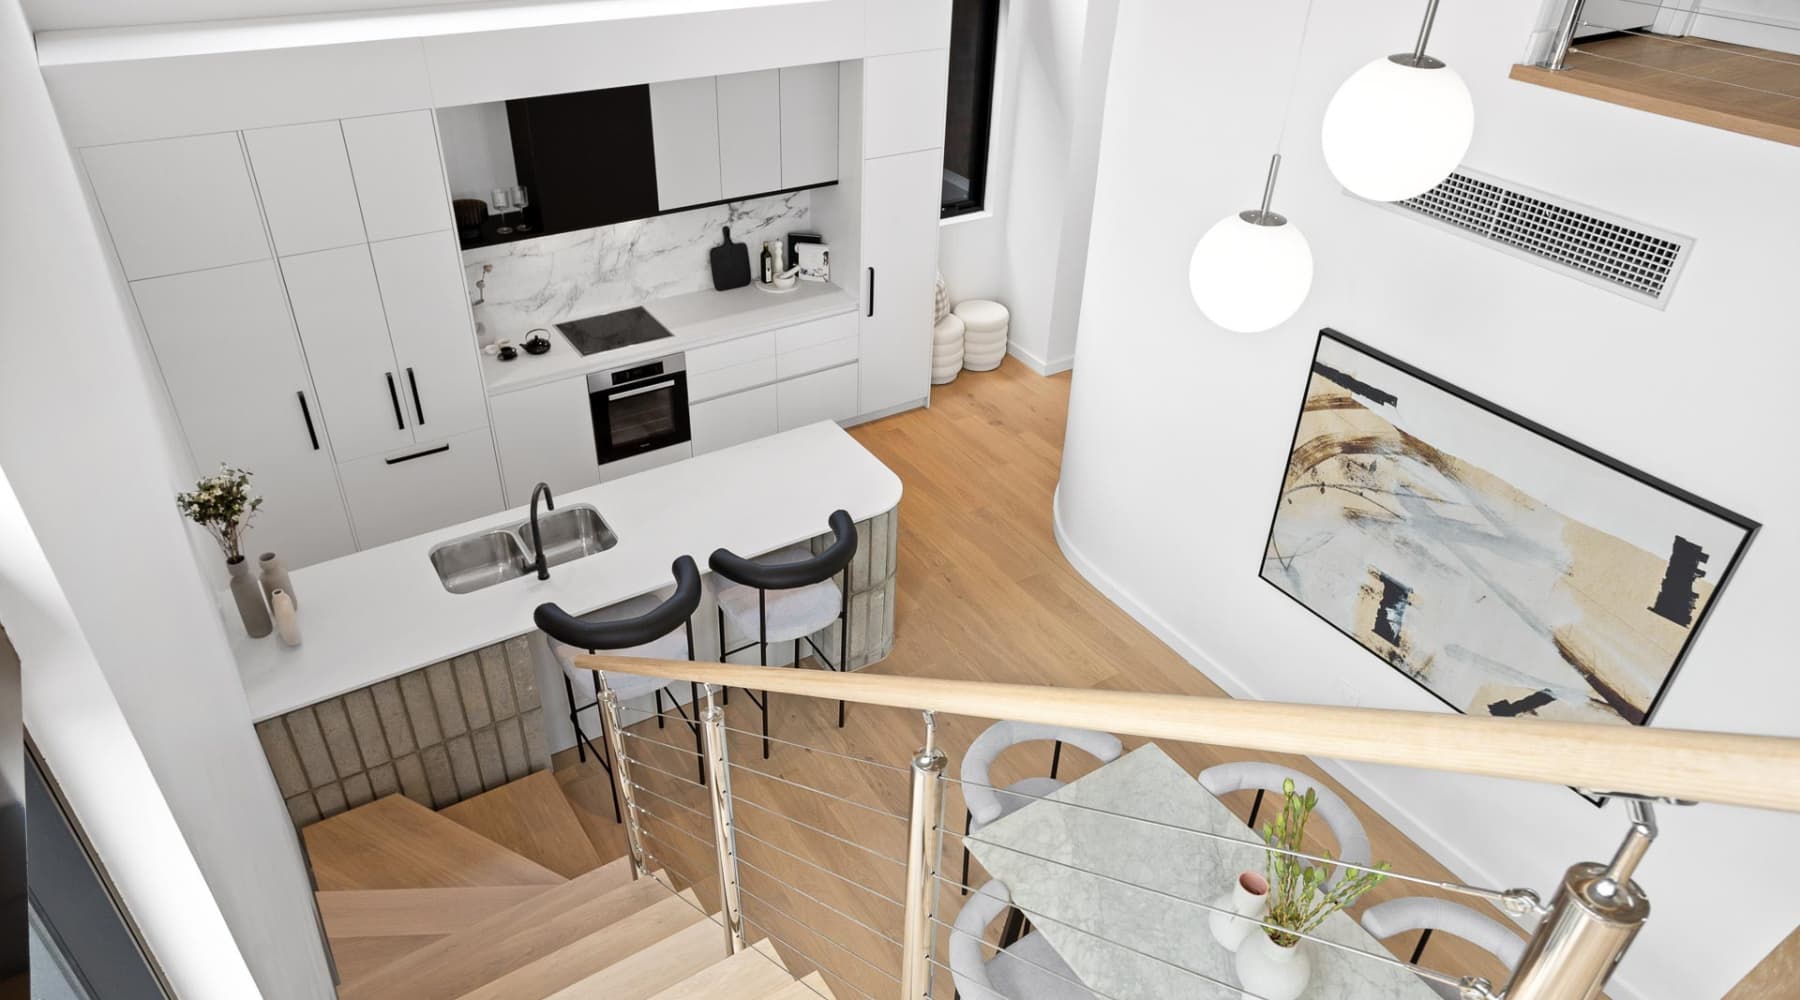 Stairwell and kitchen space of the Clifton and Central Apartments in Mount Lawley